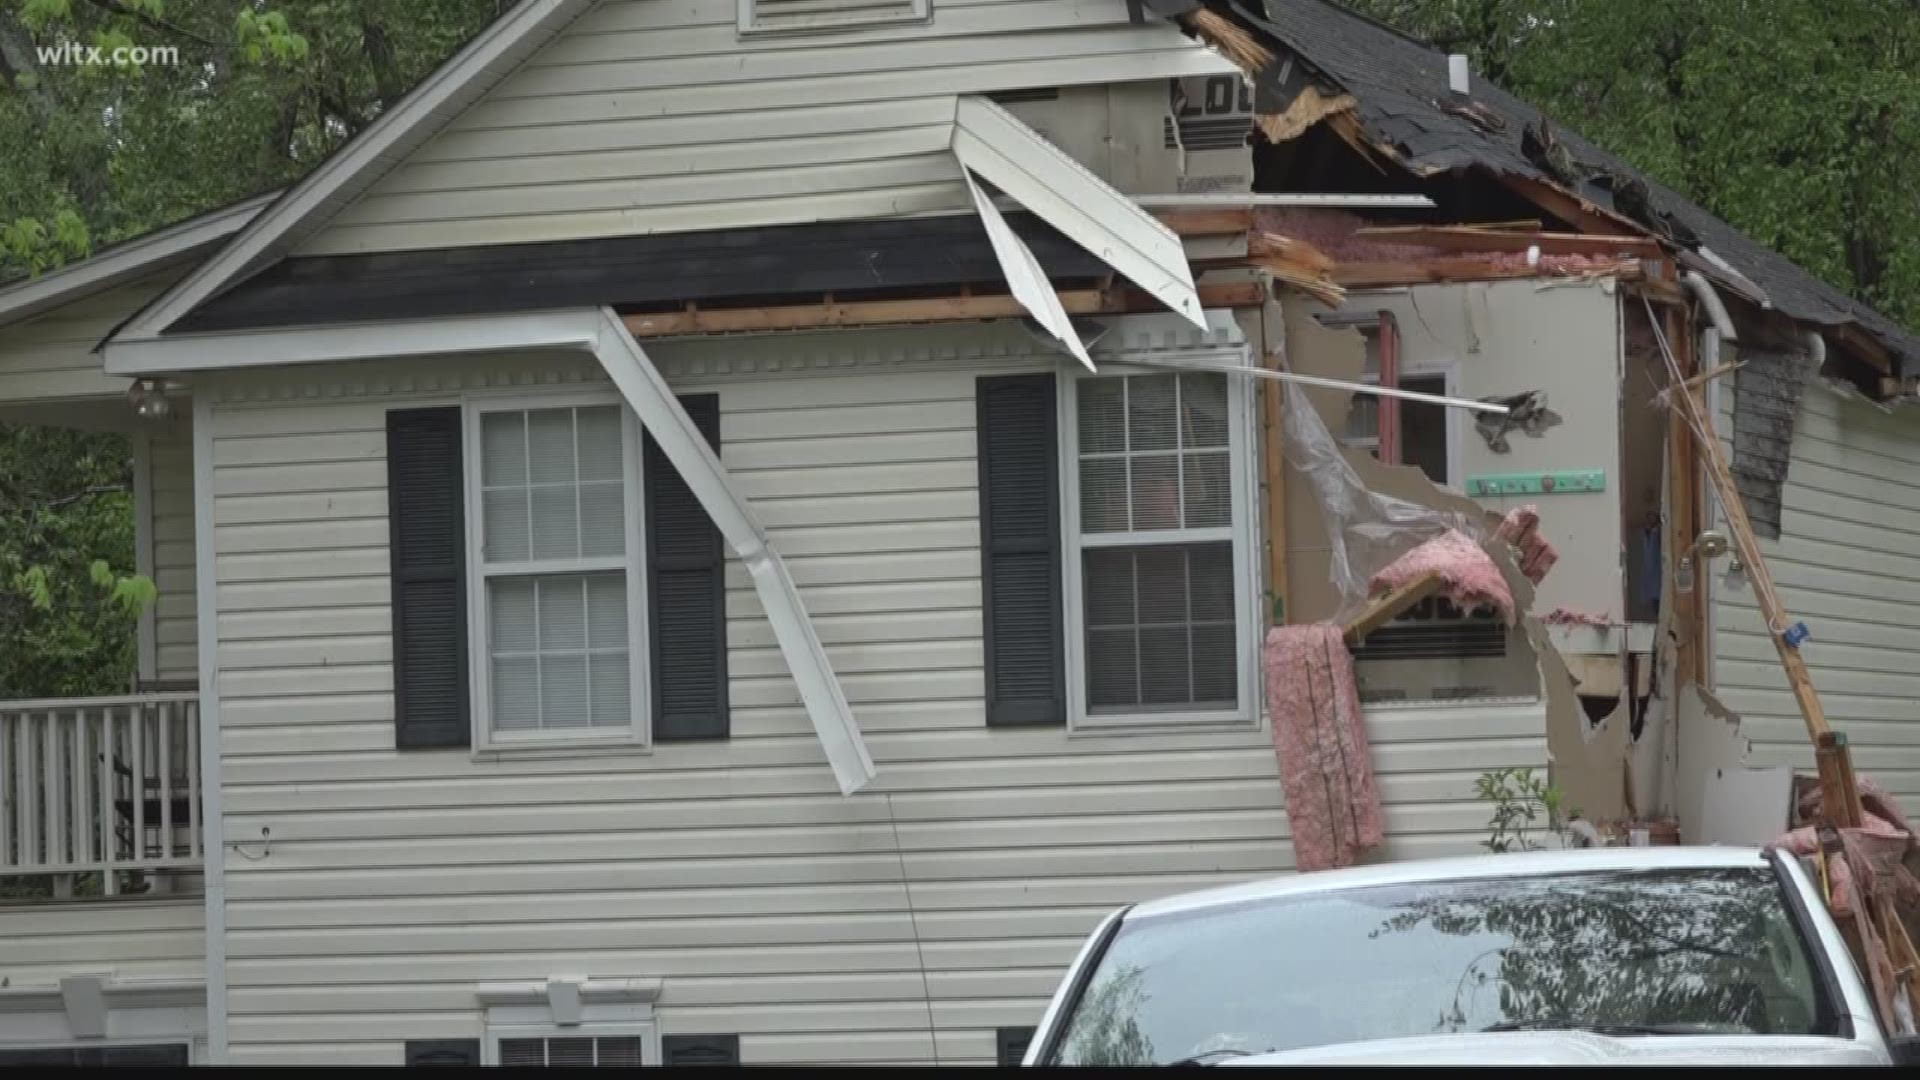 Sunday's storms caused a lot of damage in the Midlands.